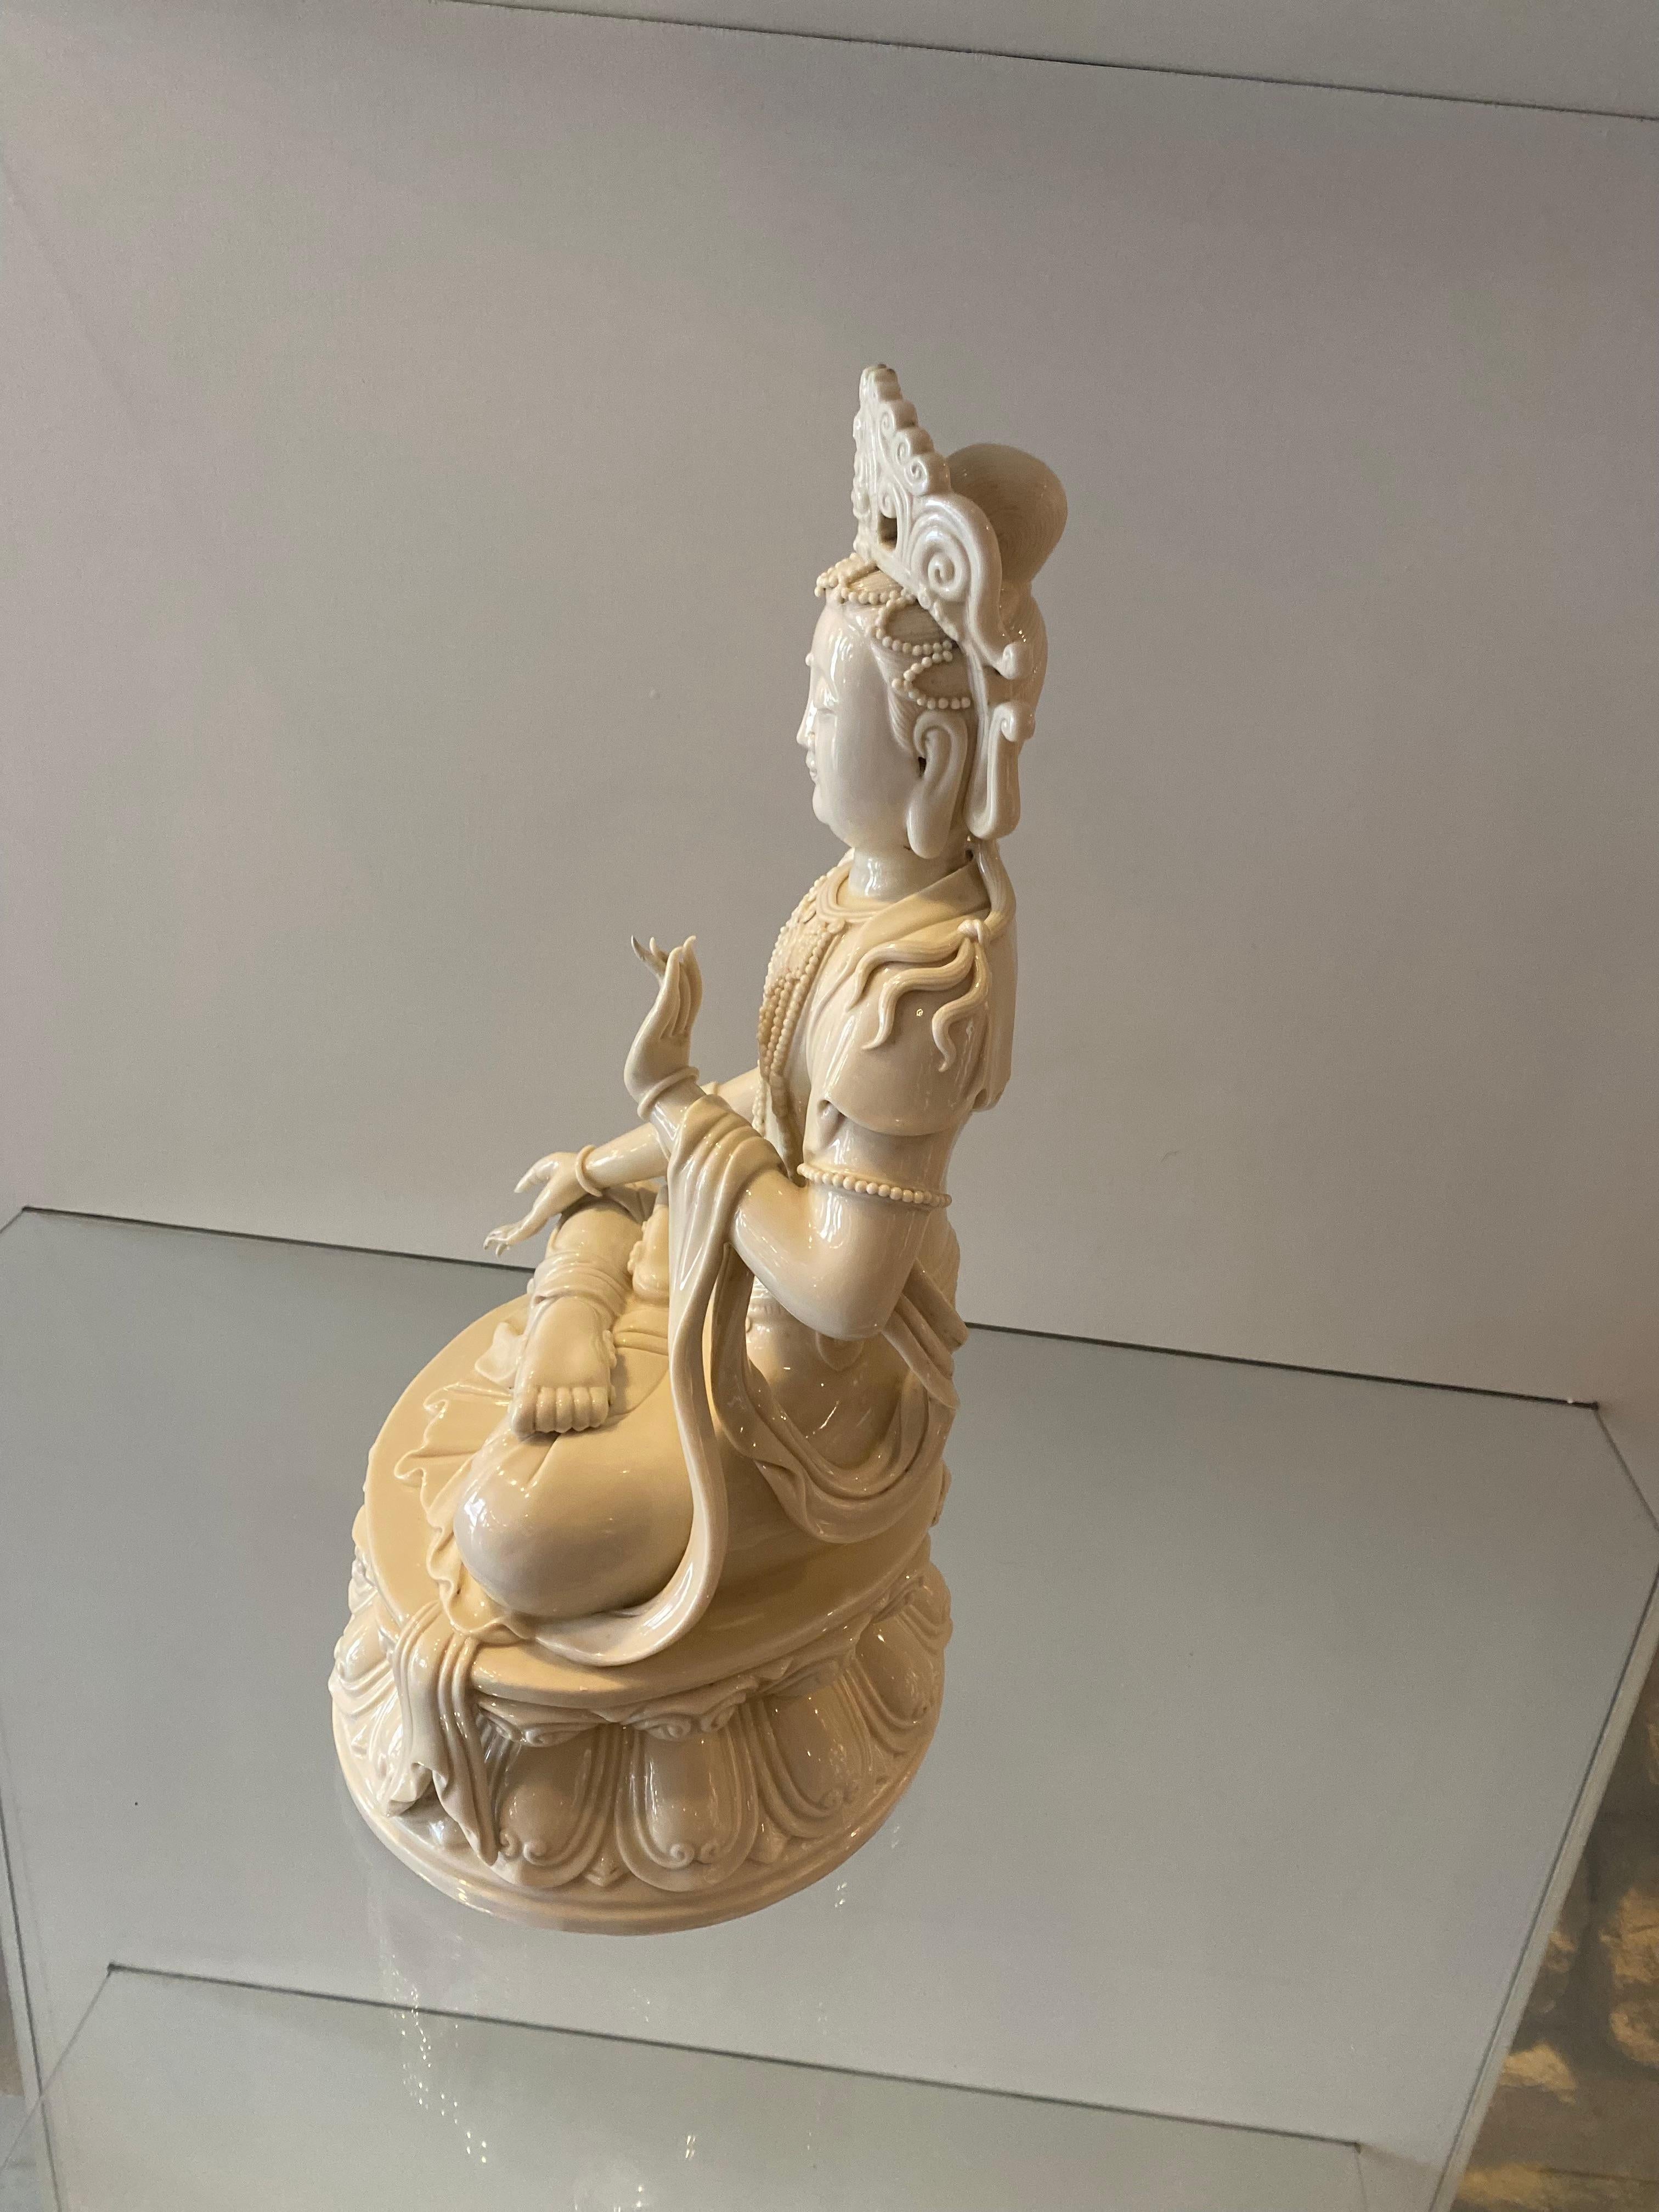 This Porcelain Blanc de chine Statue of Gwen Yin sitting on a lotus blossom with her hands in the protection and overcoming fear. It has a chop mark on the back but can not be read.